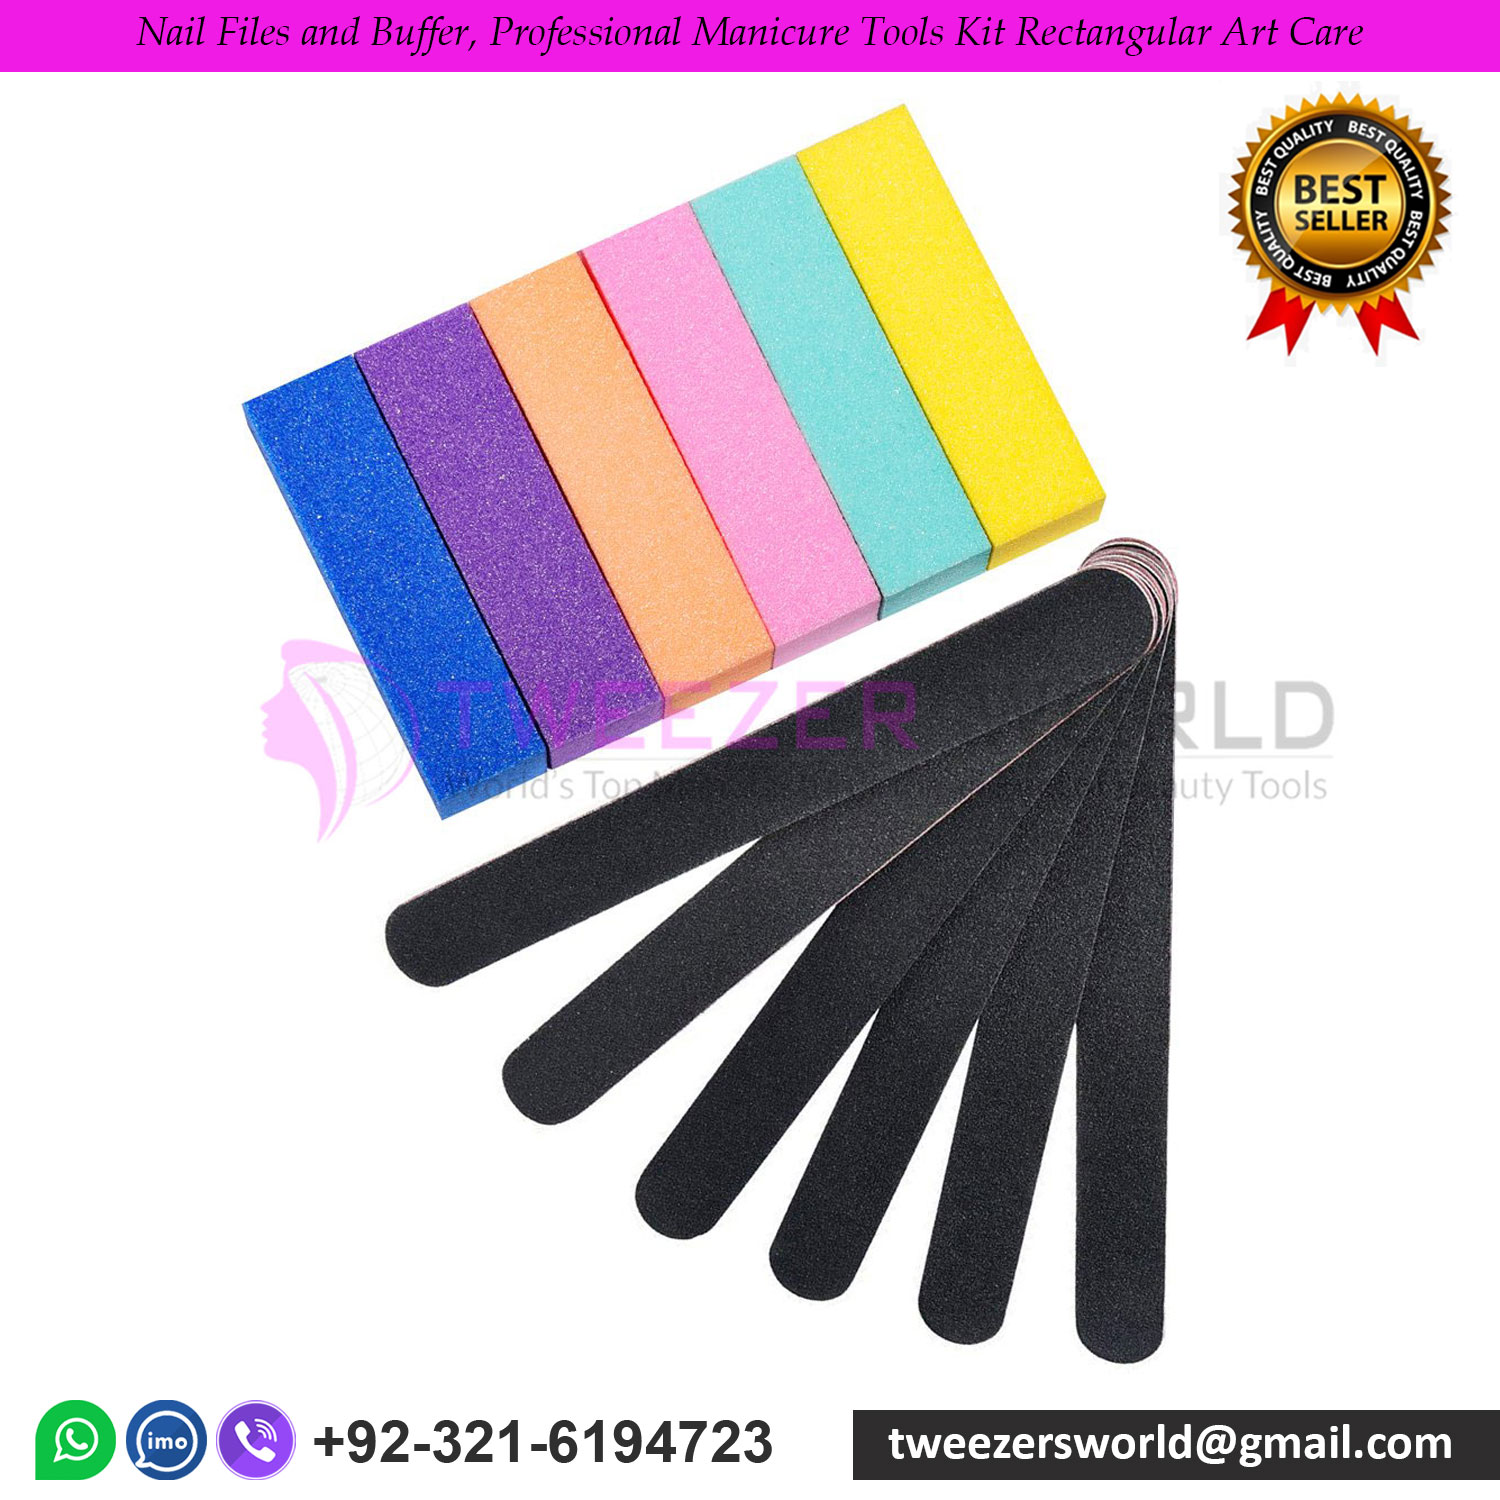 Nail Files and Buffer, Professional Manicure Tools Kit Rectangular Art Care